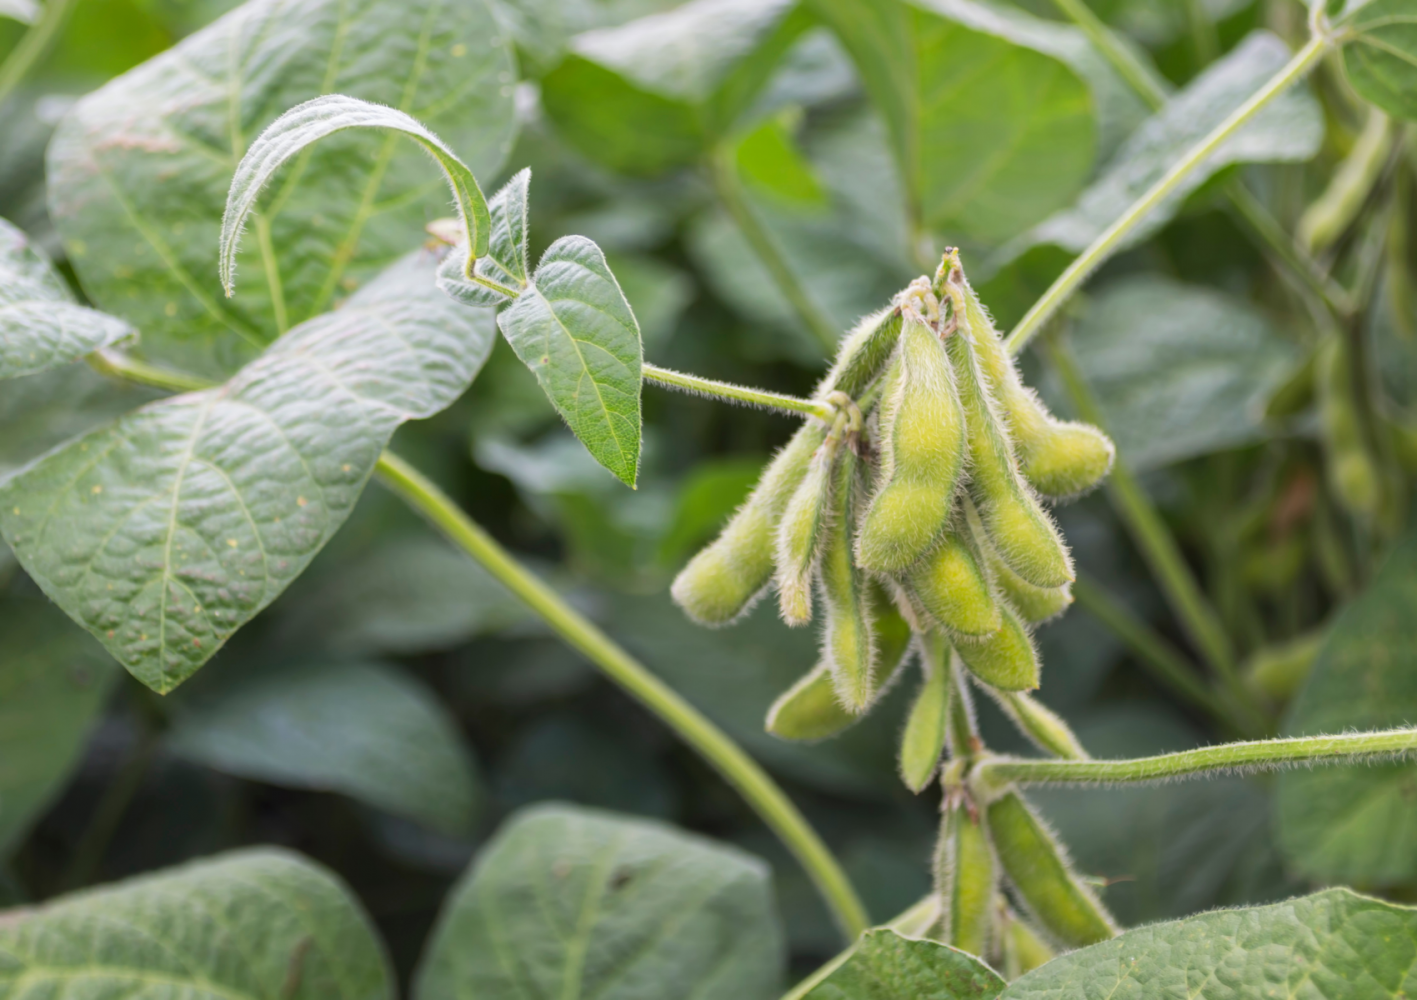 Researchers pinpoint unique growing challenges for soybeans in Africa